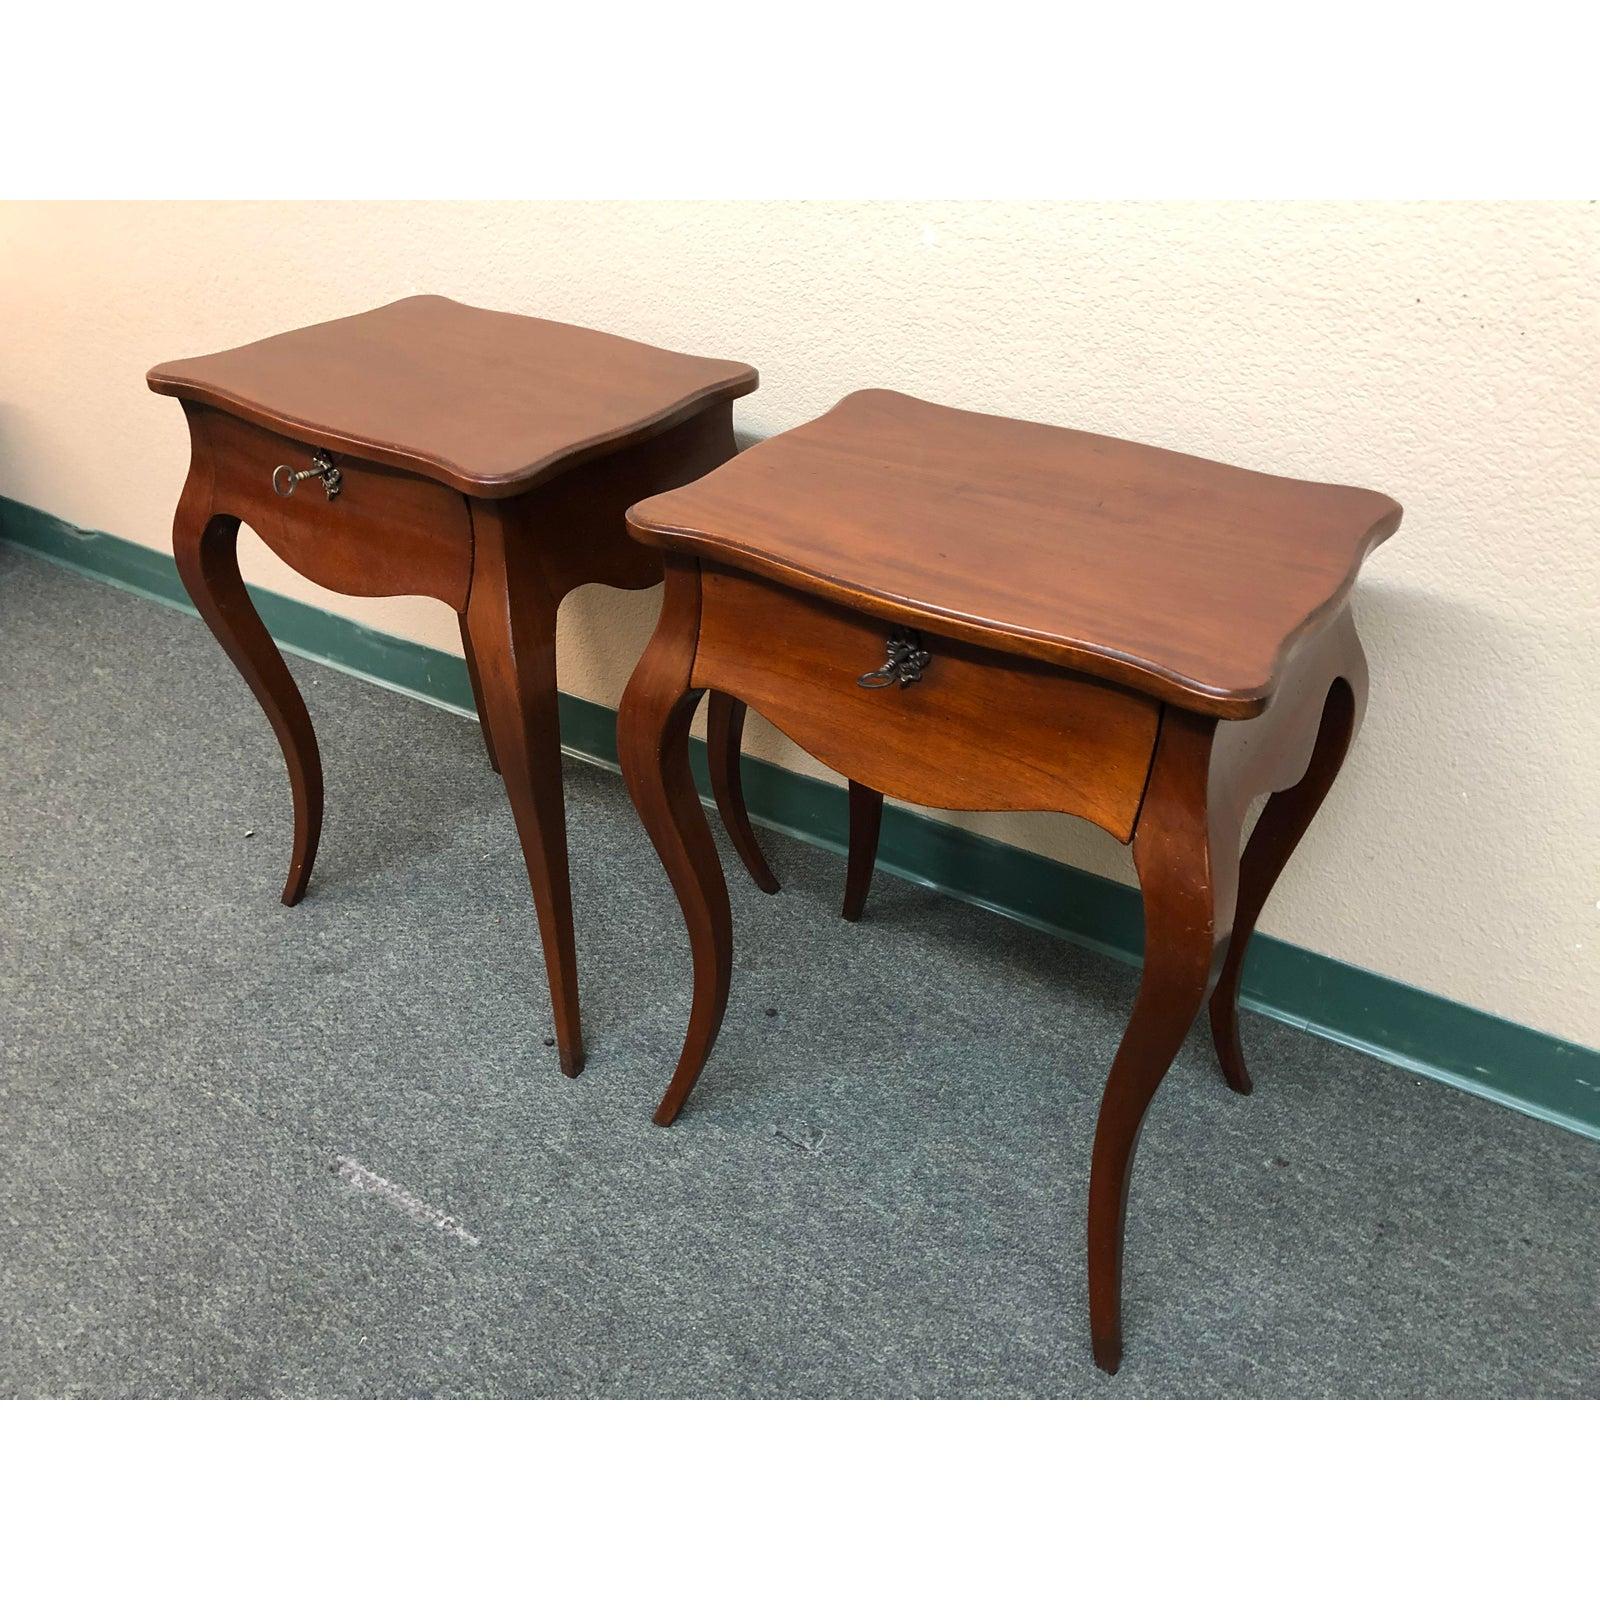 Delightful pair of side or accent tables. Referencing vintage styles the curvaceous wood top looks like it might gallop away on those gamine legs. Shallow drawer locks up your treasures, keys included. Antiqued brass fittings.

Original price